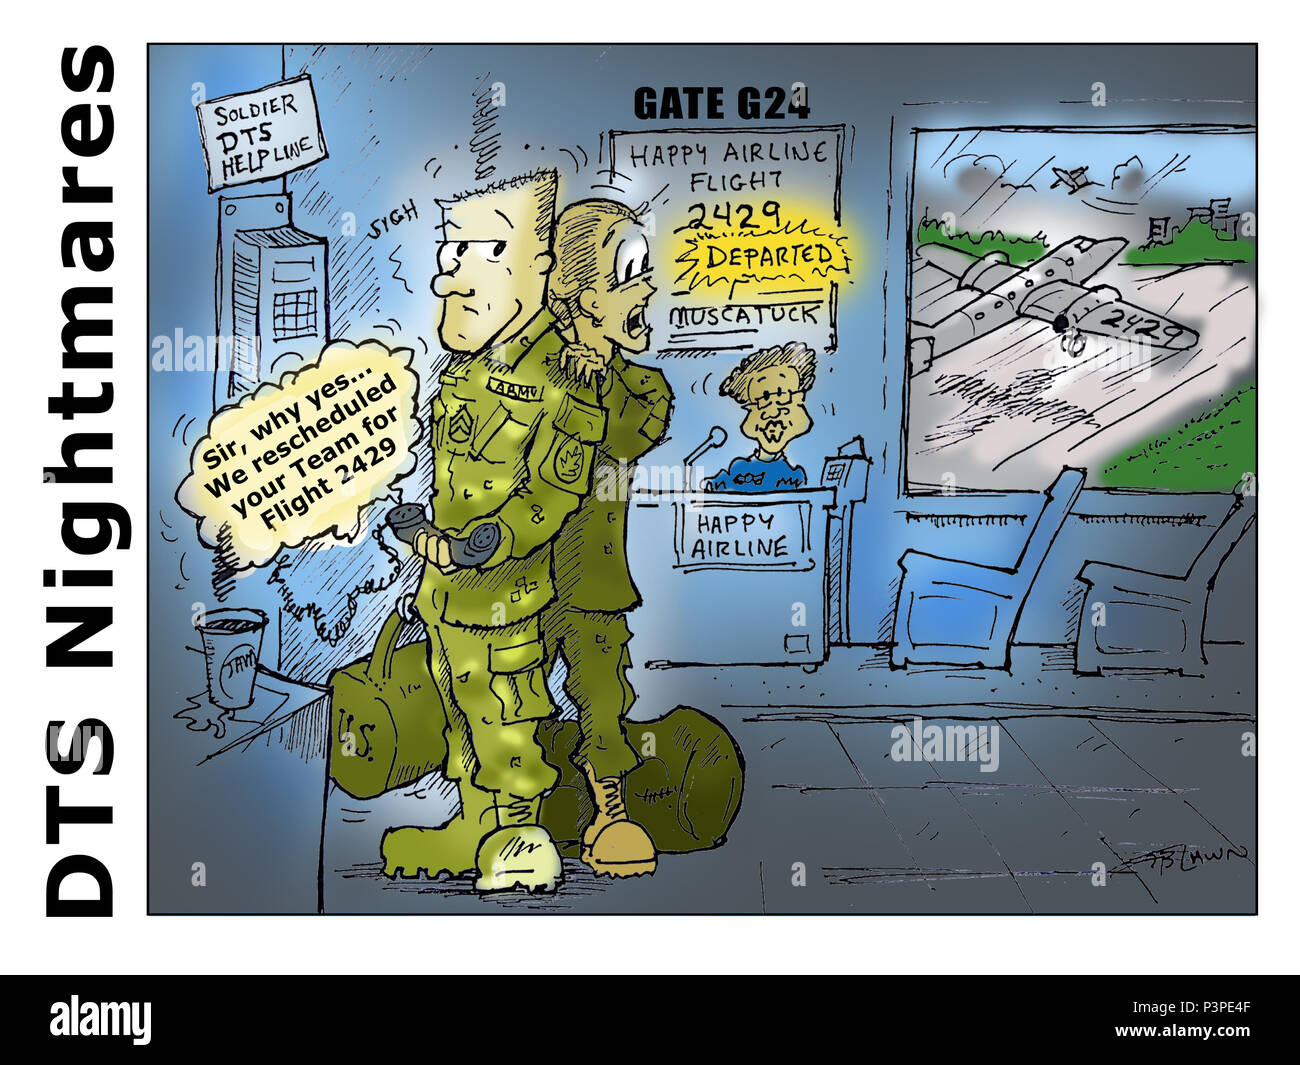 DTS NIGHTMARE - Travelling is a blast with the Defense Travel System.  (U.S. Army Reserve cartoon by 1st Sgt. Timothy Lawn, 205th Press Camp Headquarters) Stock Photo